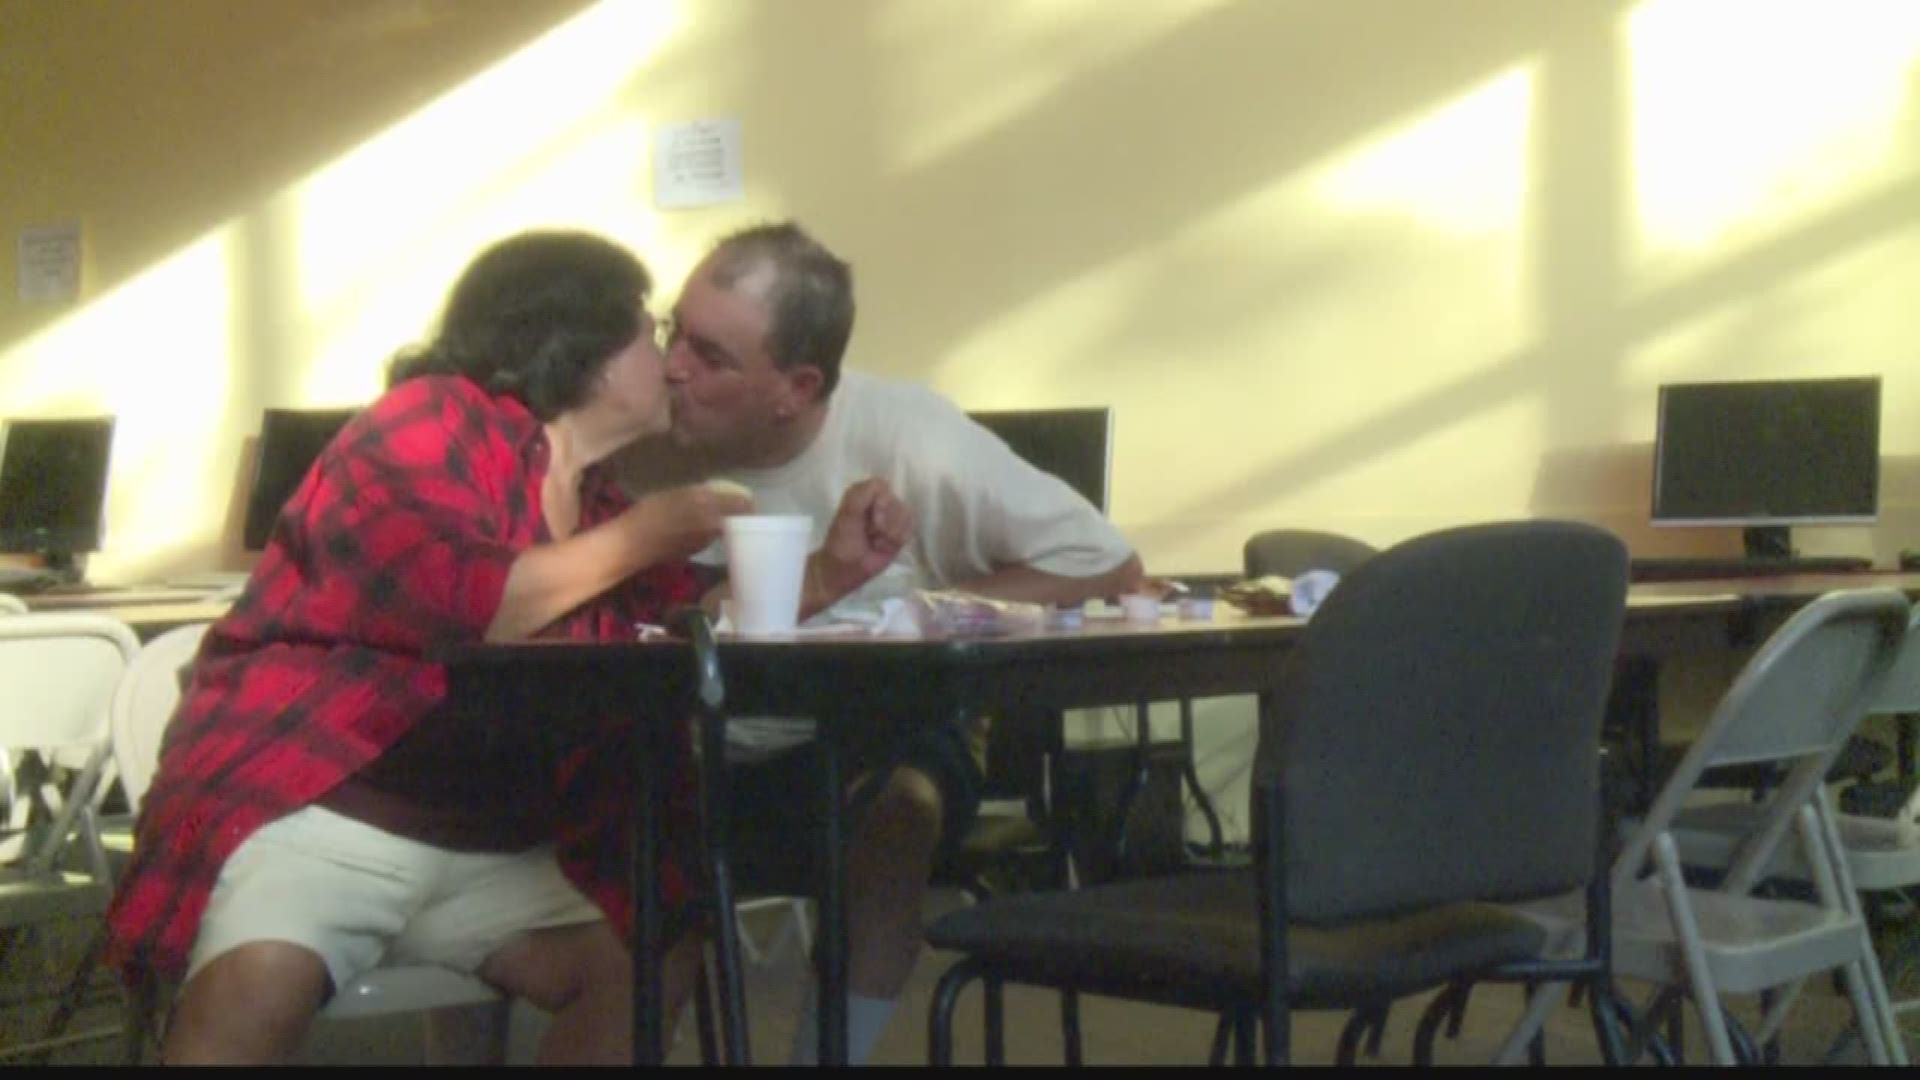 A couple celebrated their one year anniversary in an Irma shelter.